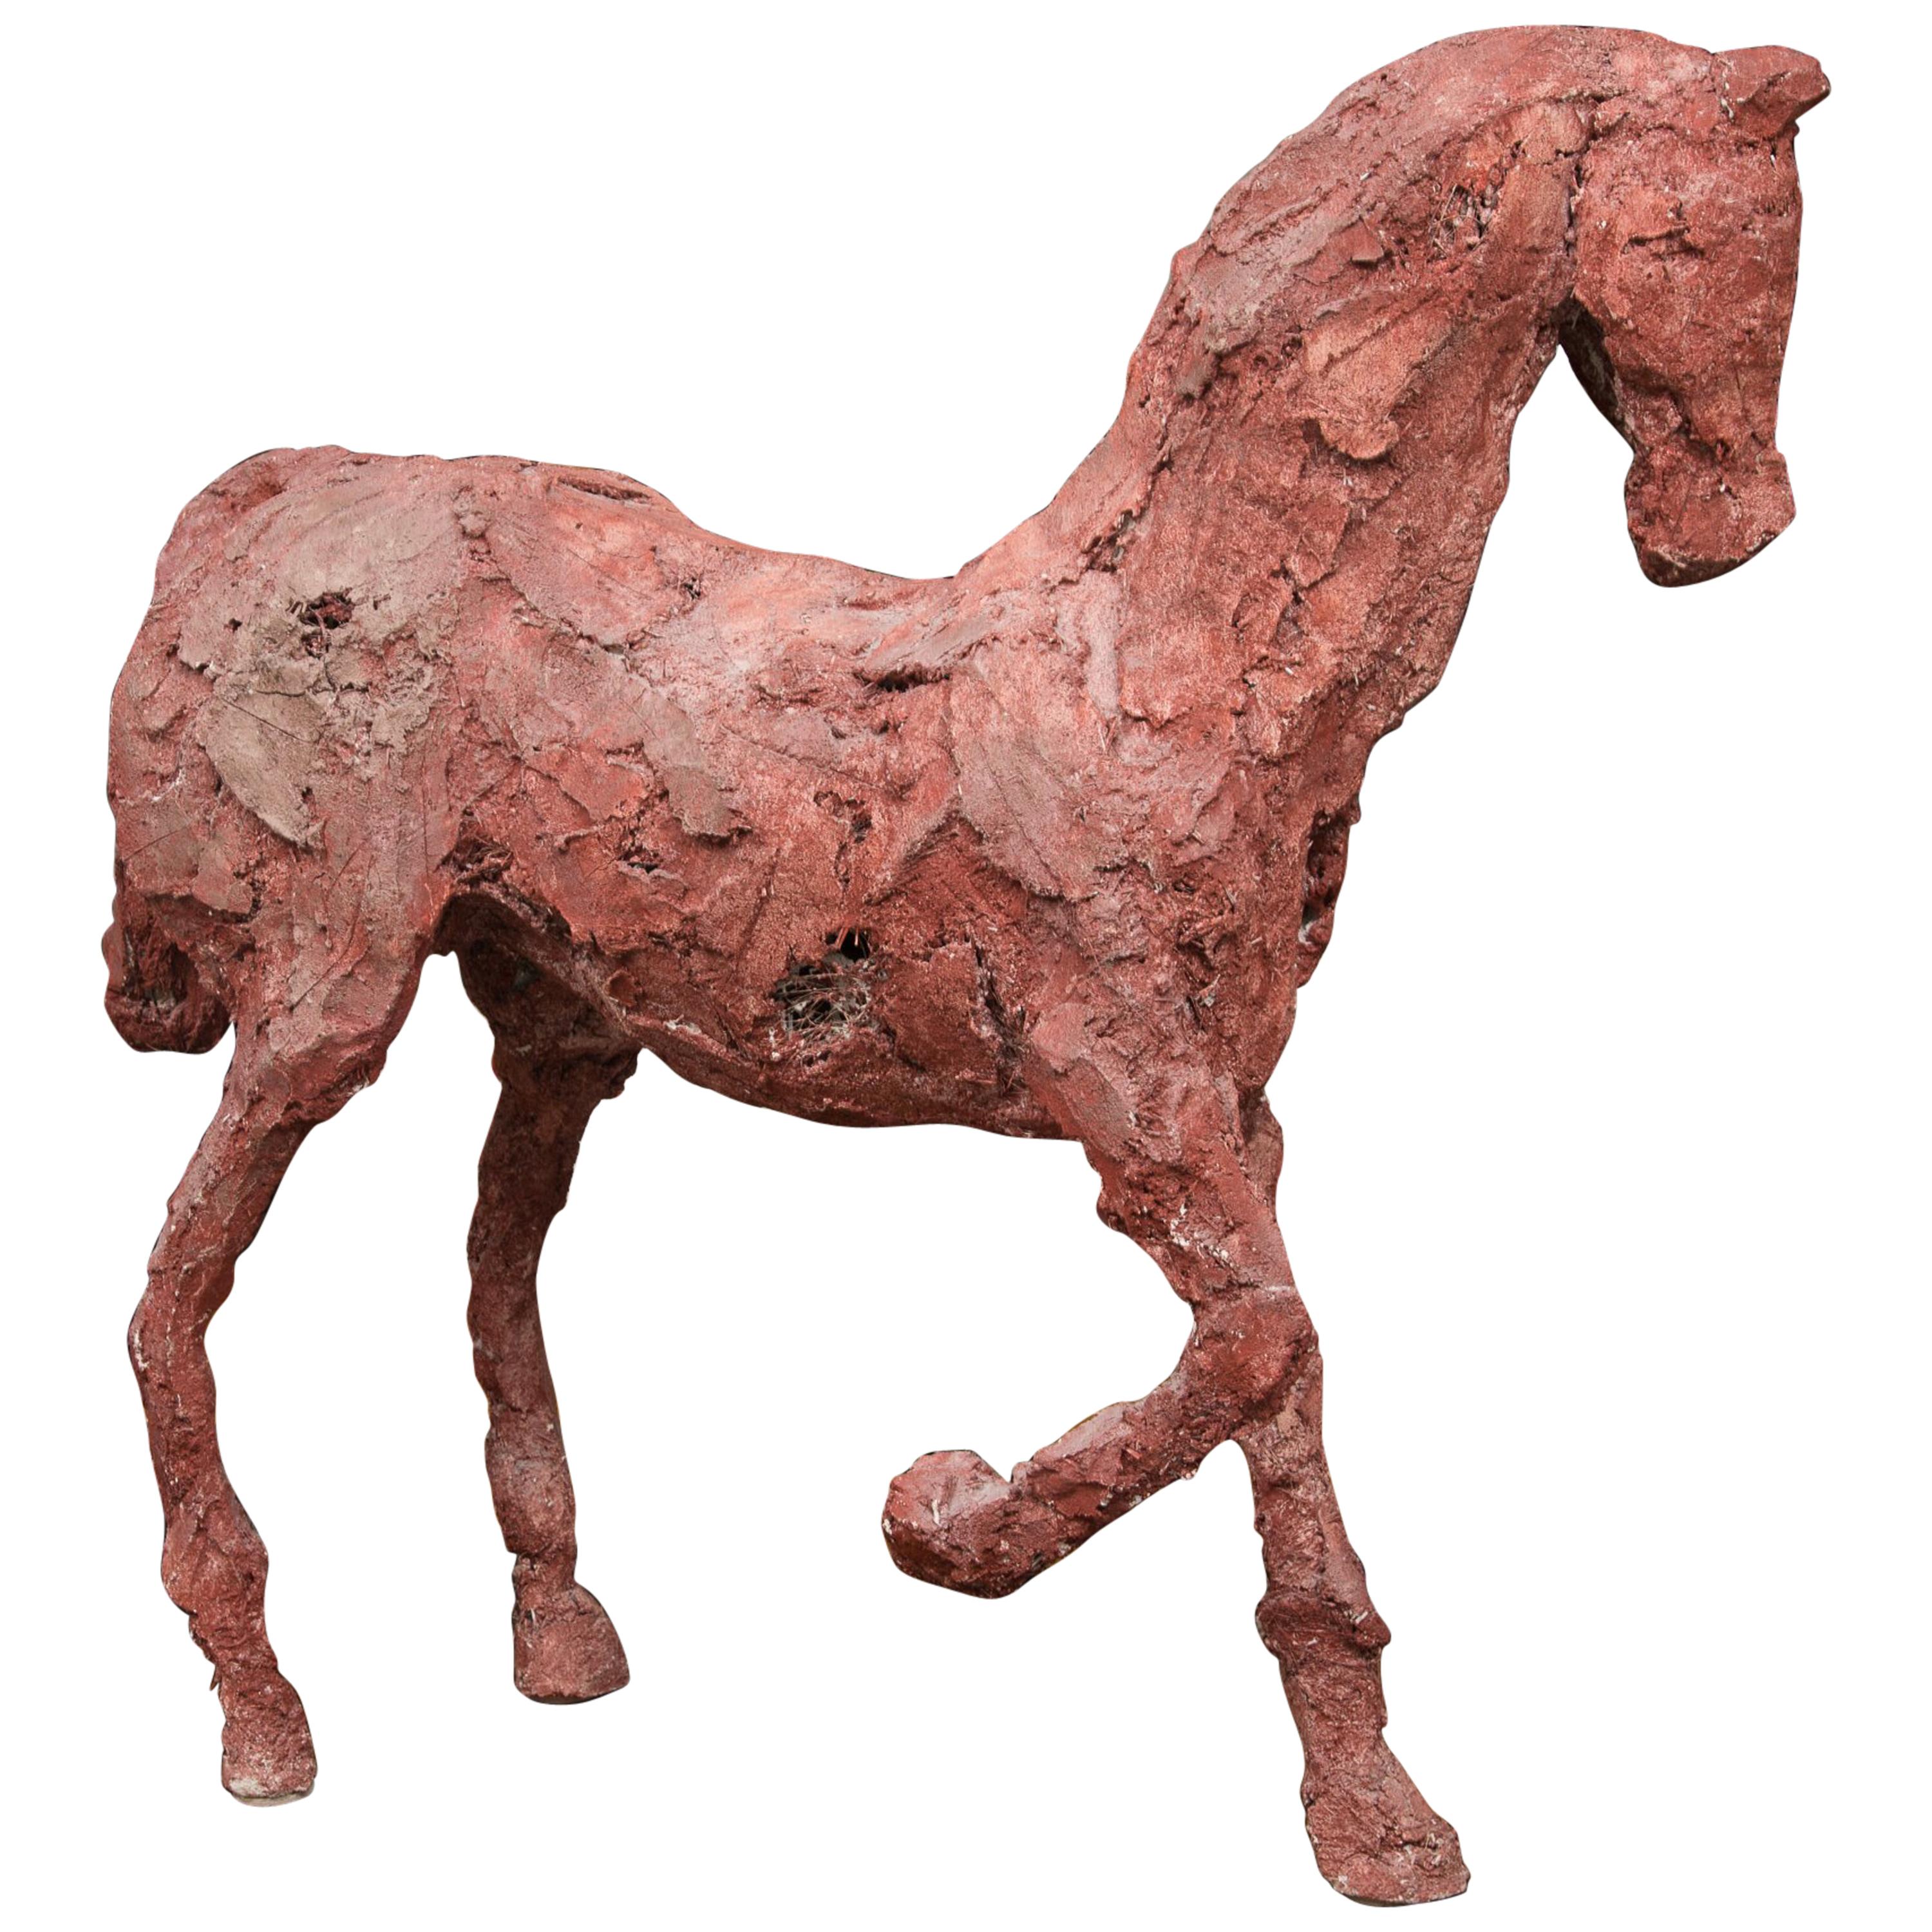 Midcentury Plaster Figure of a Stately Horse by Siri Hollander, Sculpture